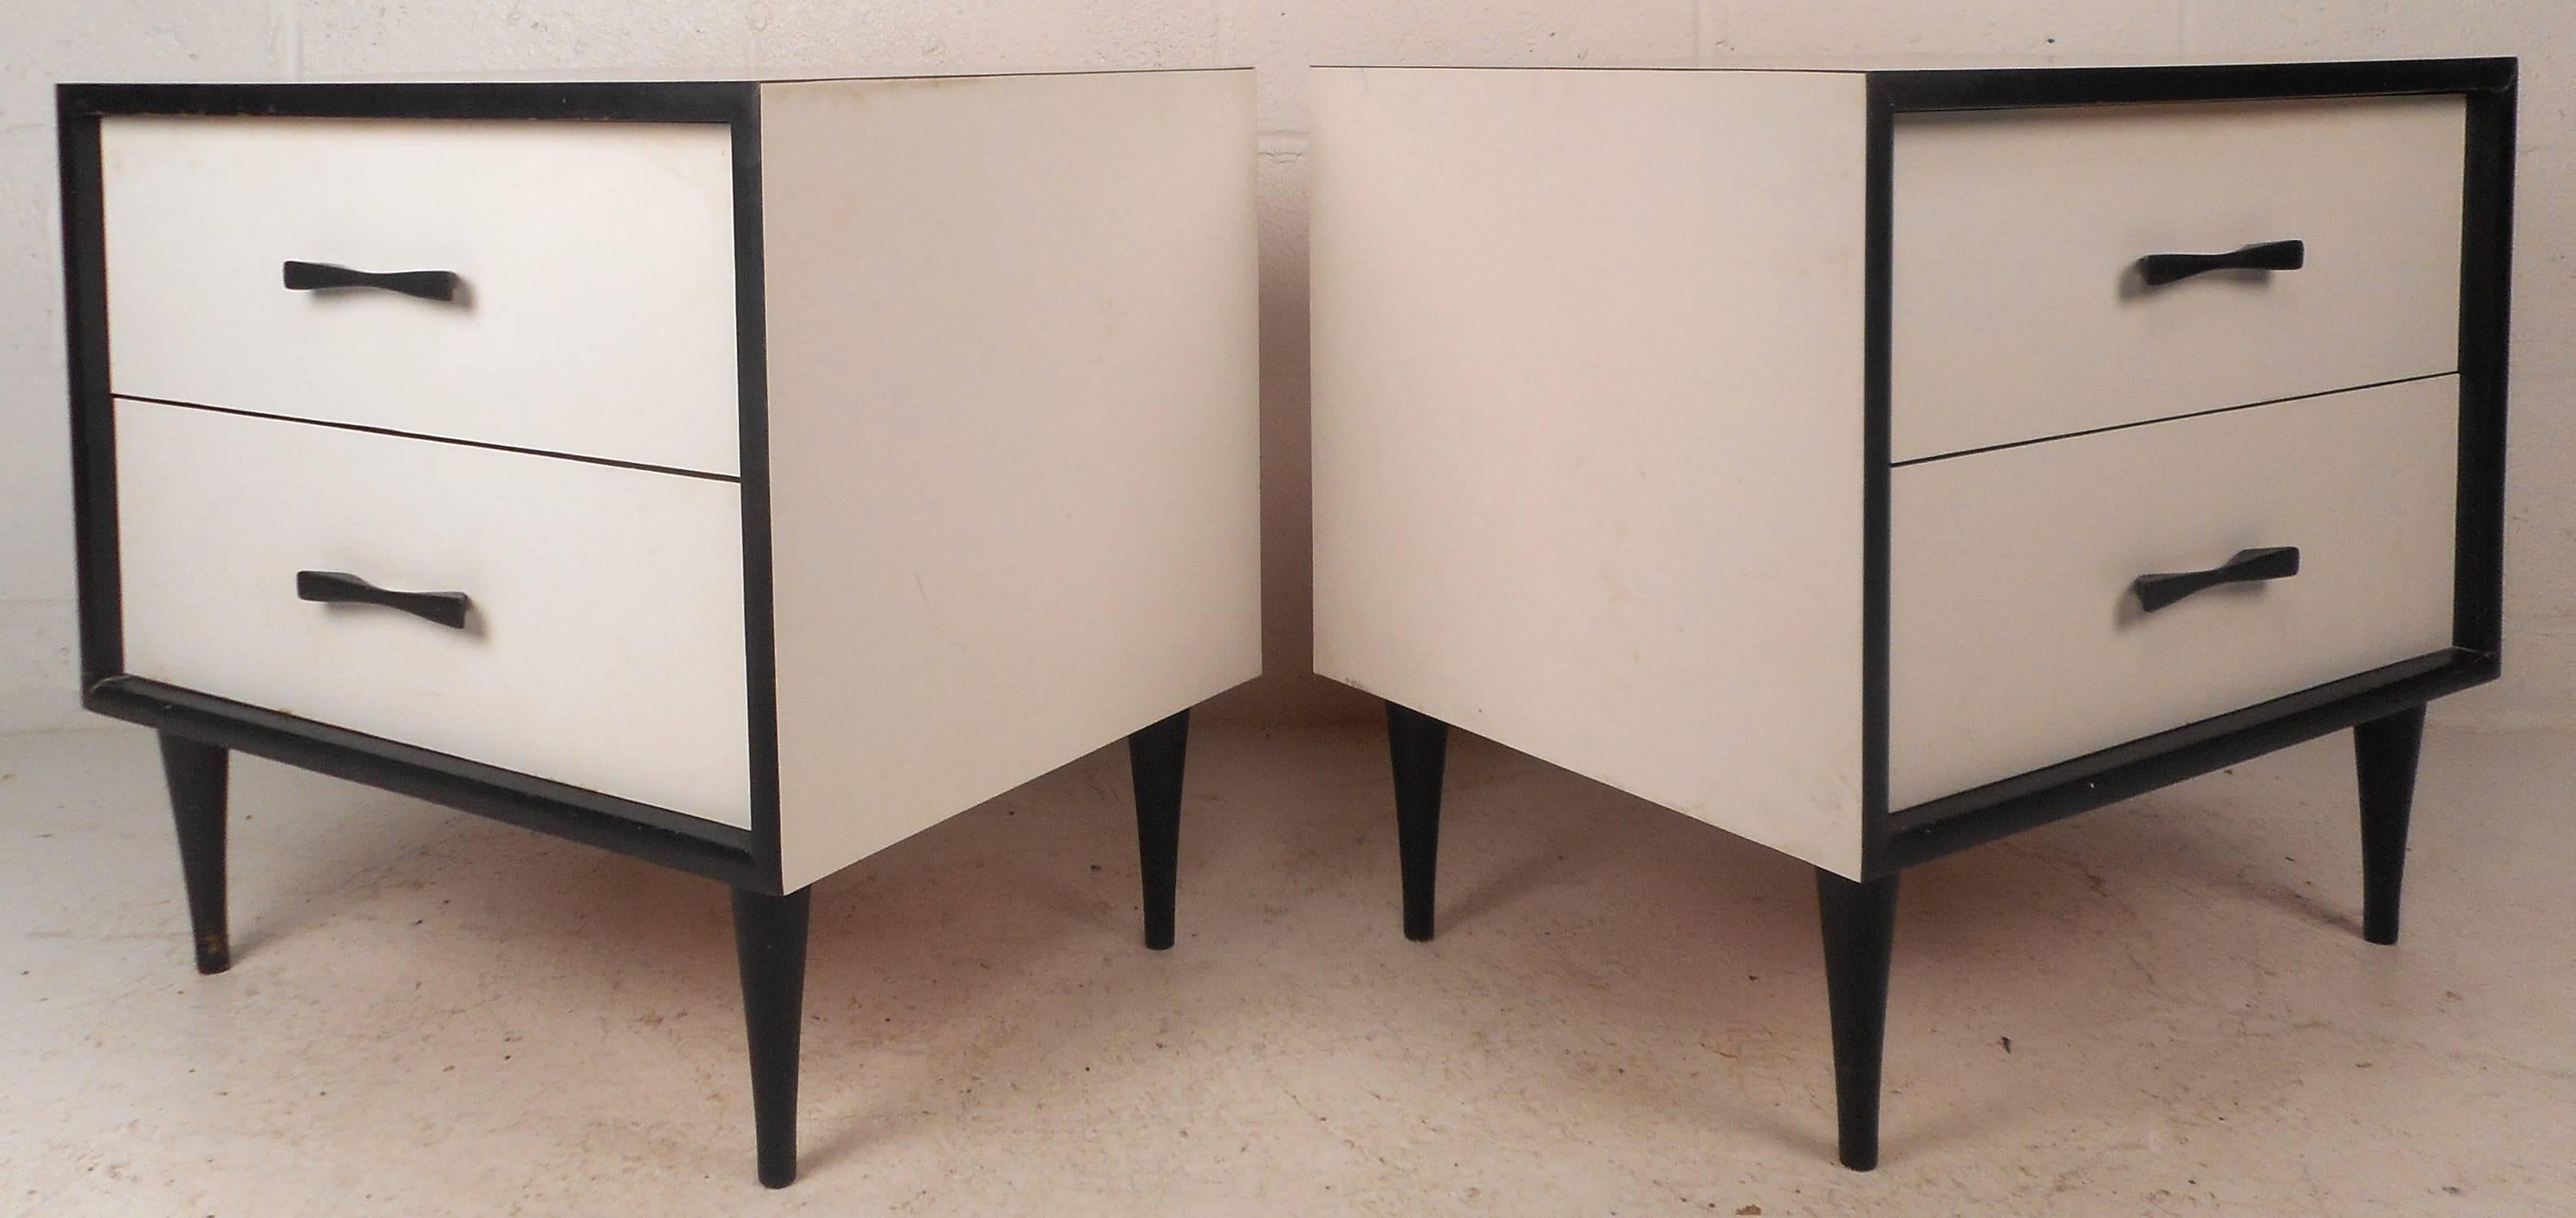 Elegant pair of vintage modern end tables feature unique black bow-tie pulls and tapered legs. Sleek design with white laminate and beautiful black trim around the fronts. Two hefty drawers offer plenty of room for storage without sacrificing style